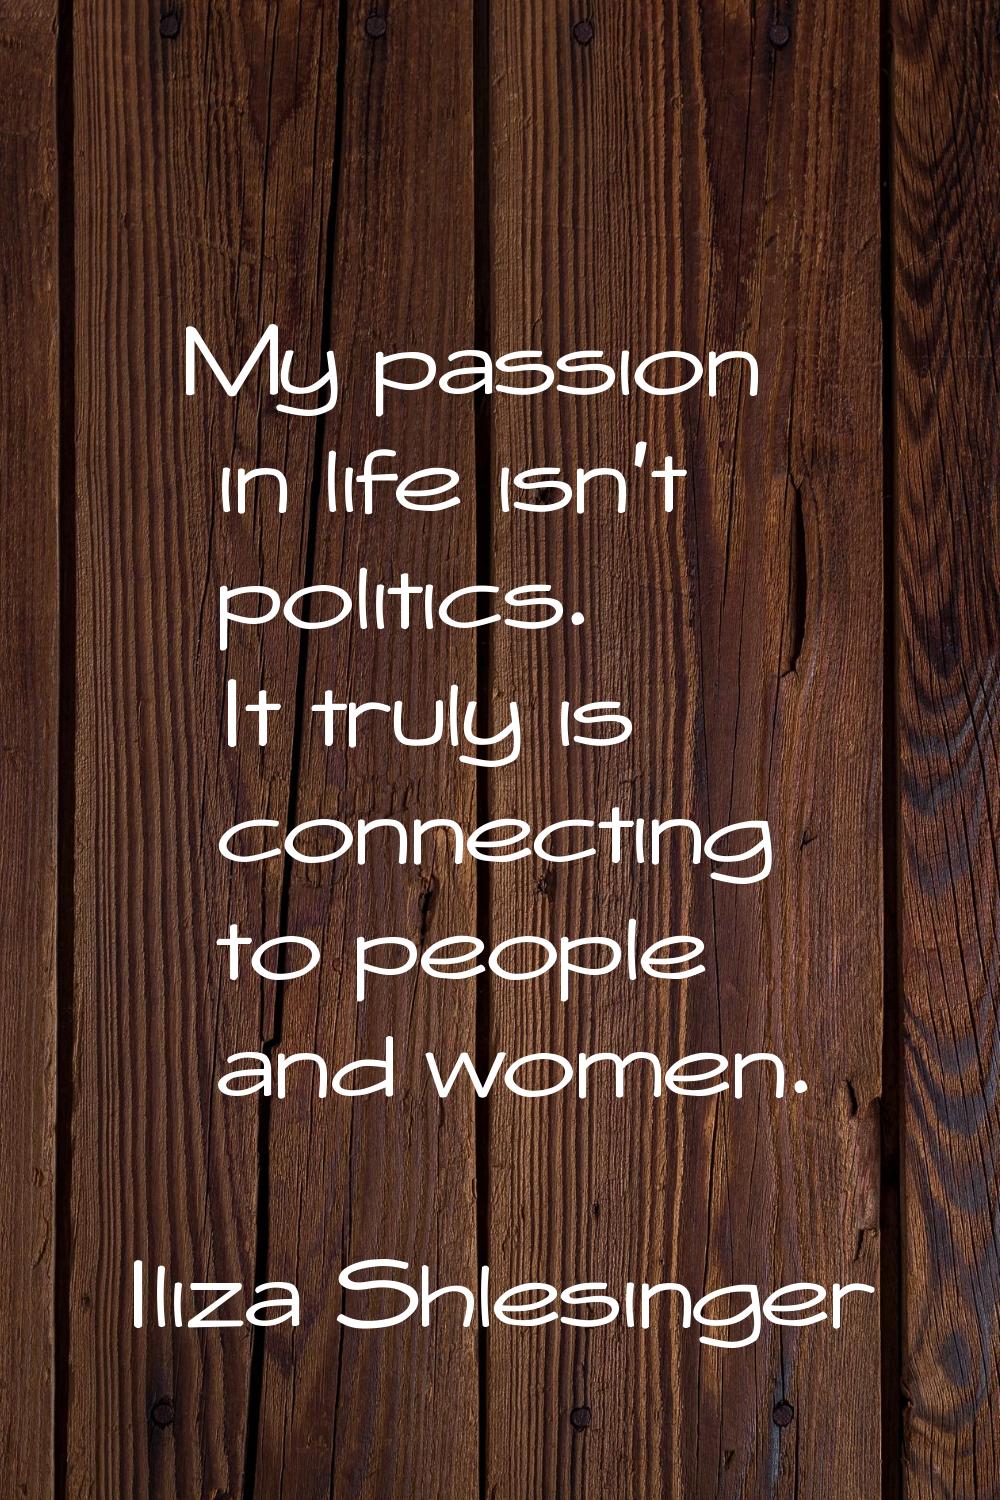 My passion in life isn't politics. It truly is connecting to people and women.